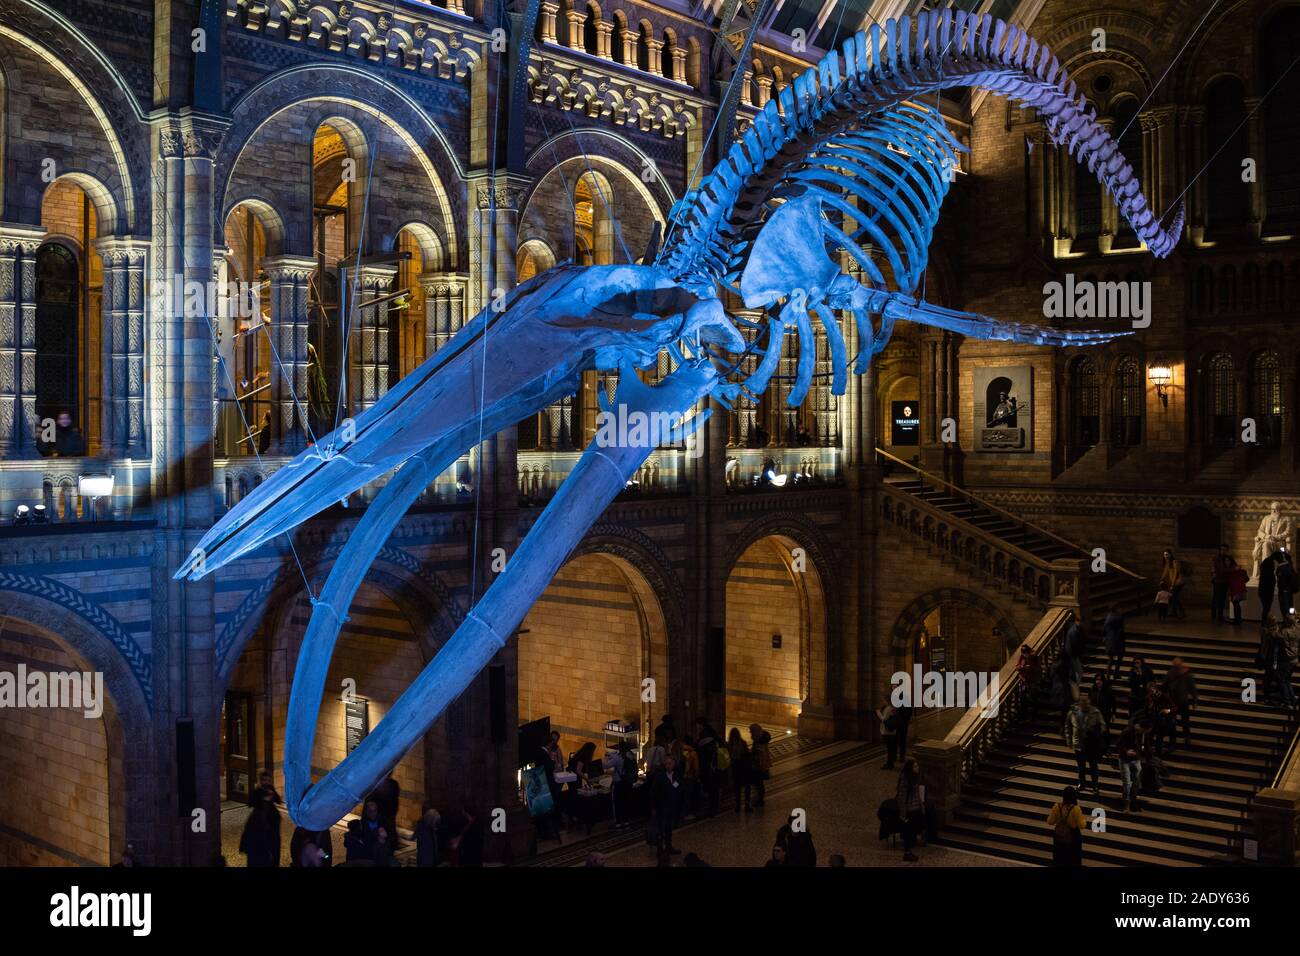 Natural History Museum, London, UK 29th November 2019. A view of the Hope, the Blue Whale skeleton which hangs in the Hintze Hall during a Natural History Museum late night opening. The opening was themed around the new David Attenborough nature documentary 'Seven worlds, one planet' and visitors were able to meet scientists and filmmakers who worked on the series. Stock Photo